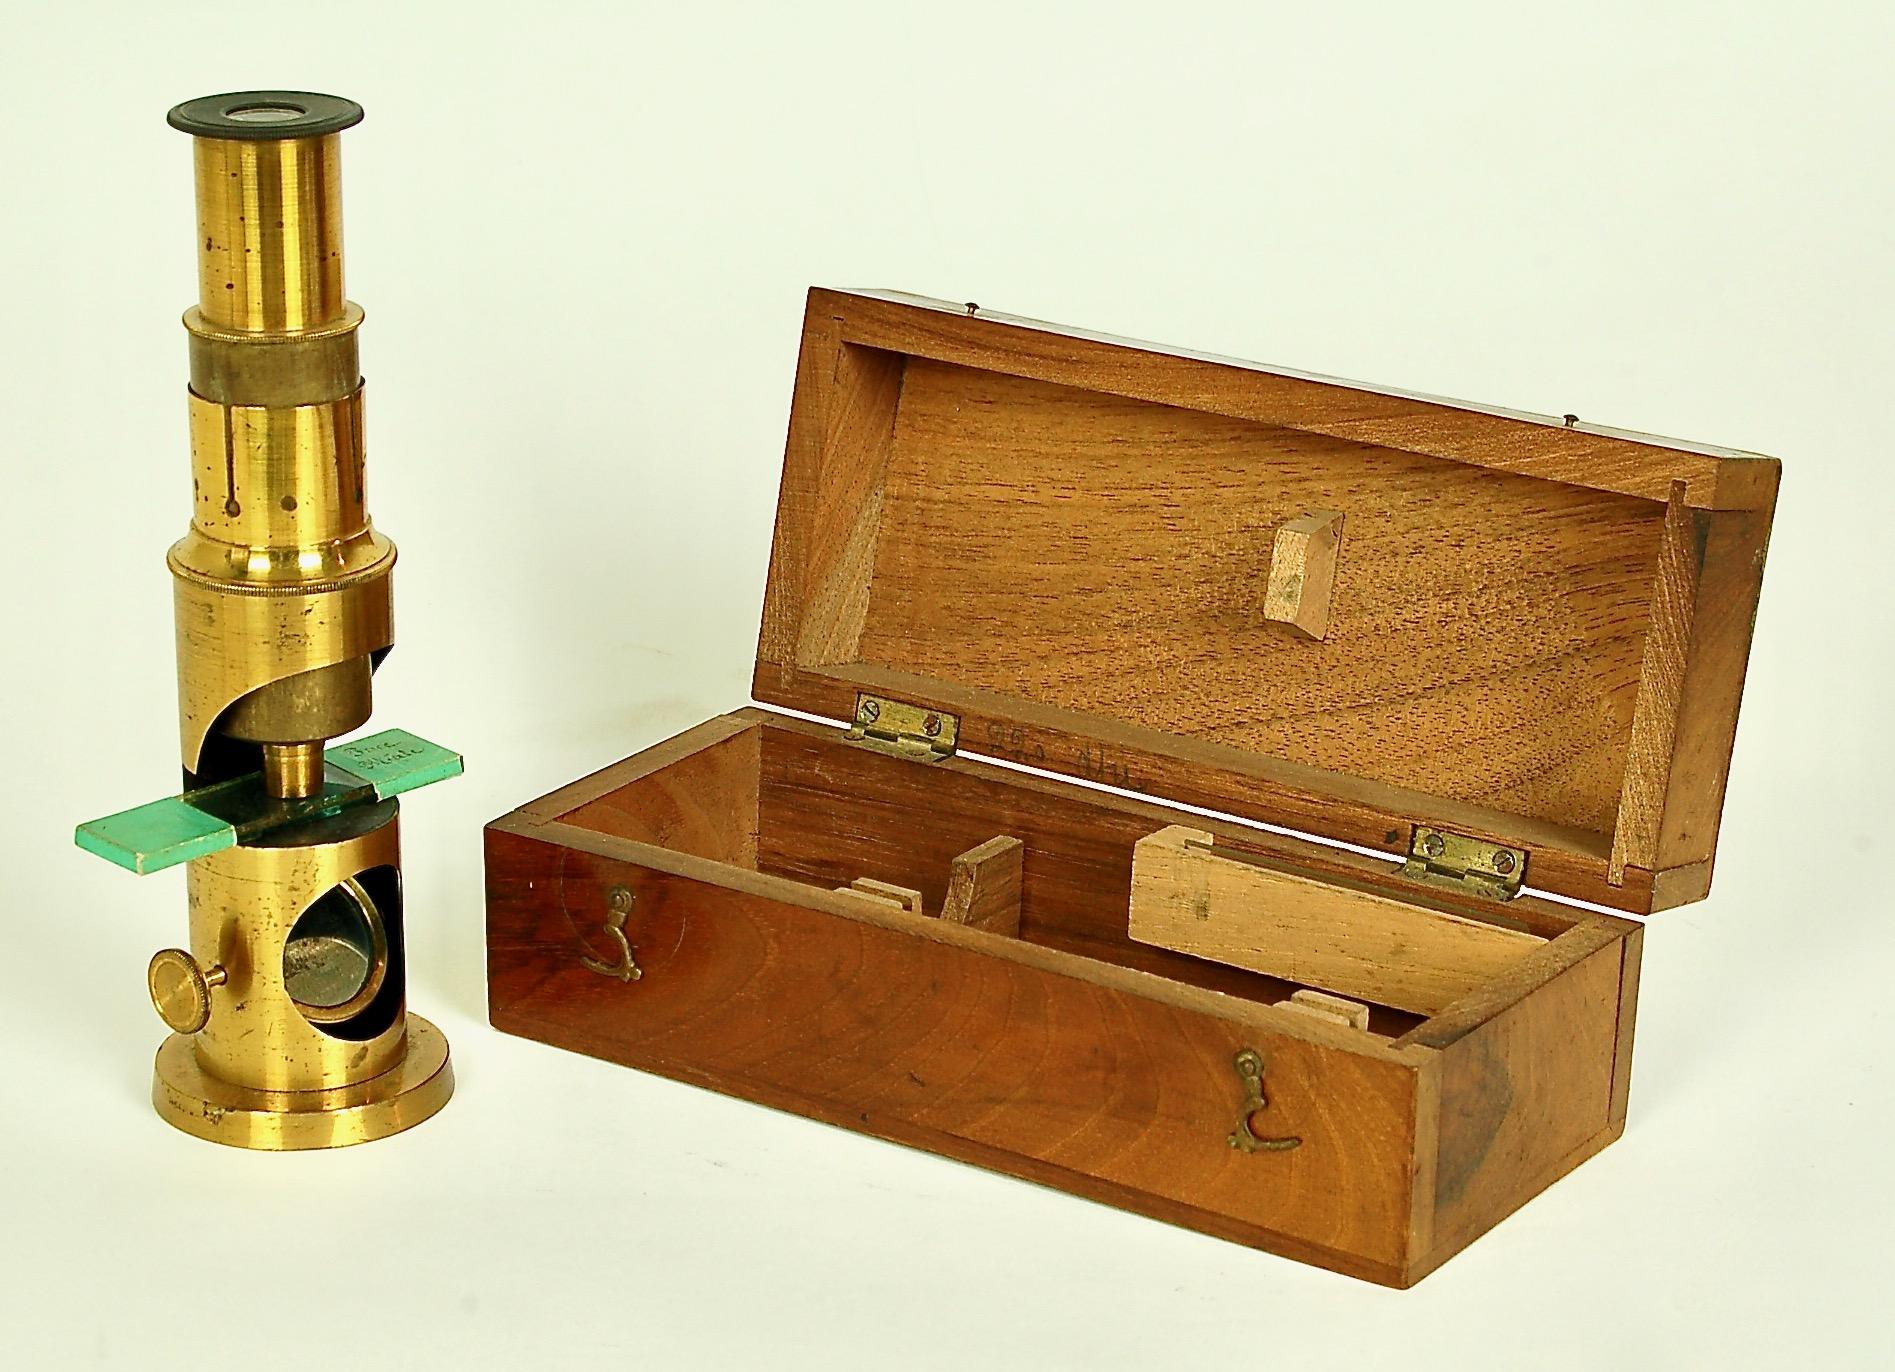 microscope and case